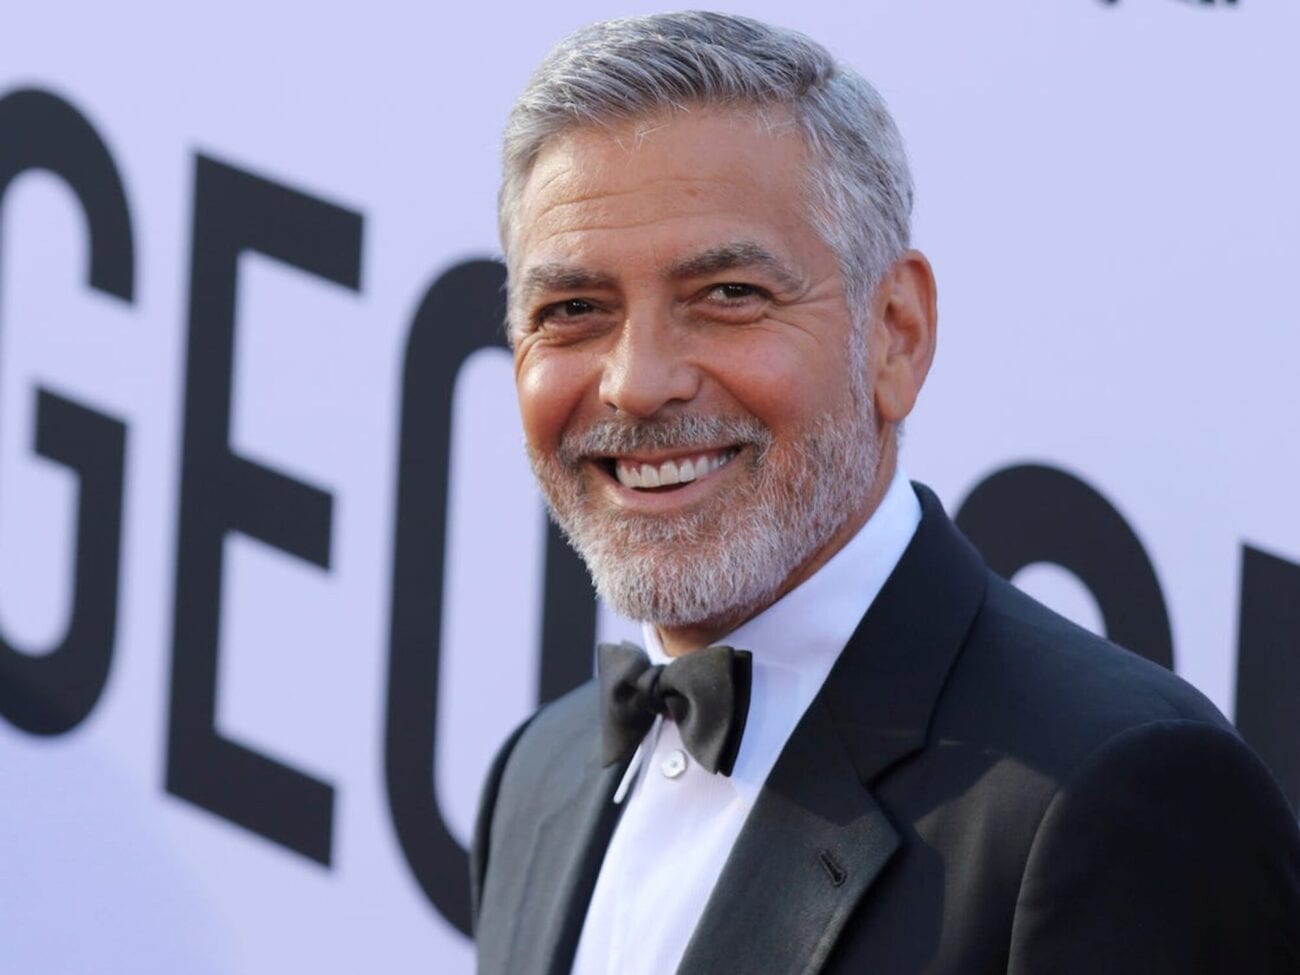 George Clooney has been charming the world with his acting career for forty years. How did he achieve his massive net worth?